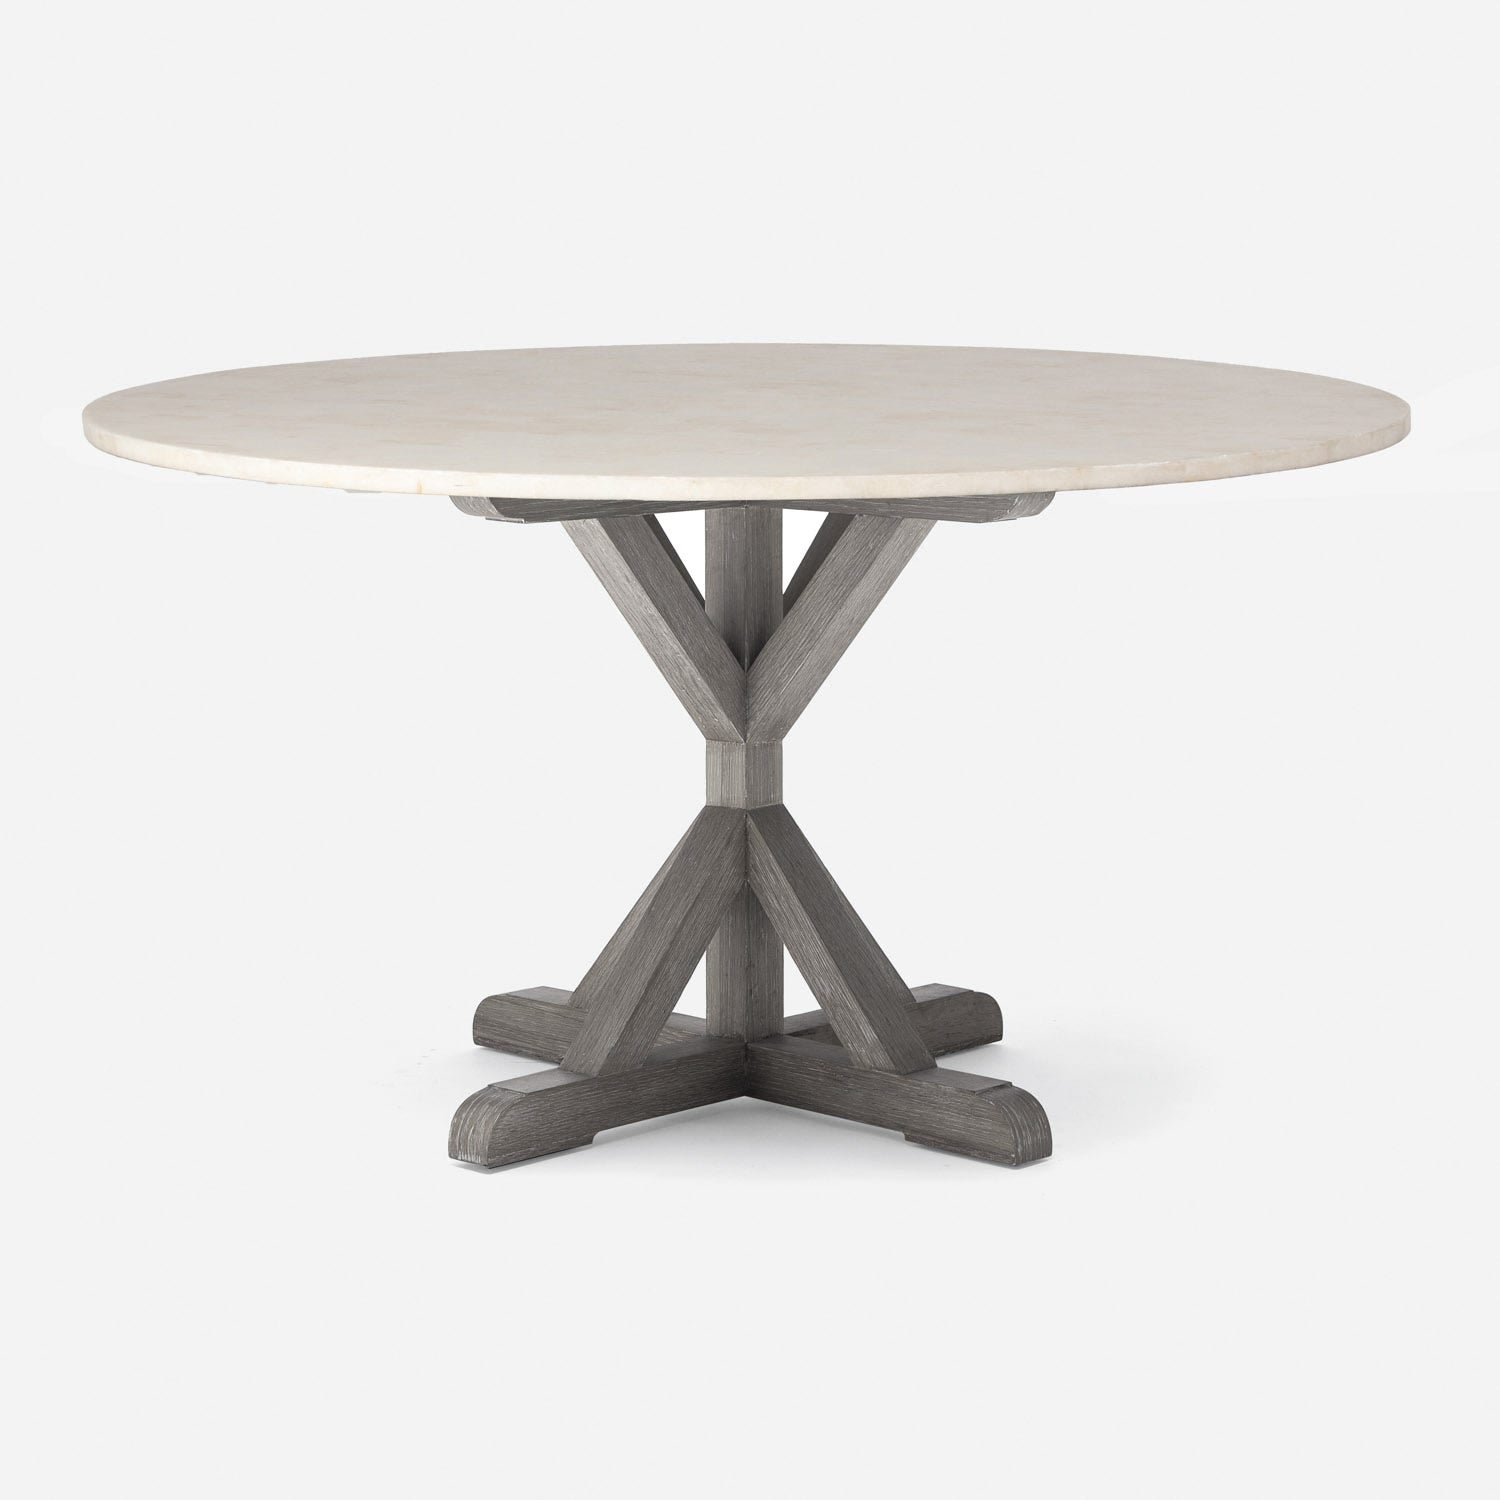 Made Goods Dane 54" x 30" Gray Cerused Oak Dinning Table With Round Ice Crystal Stone Table Top